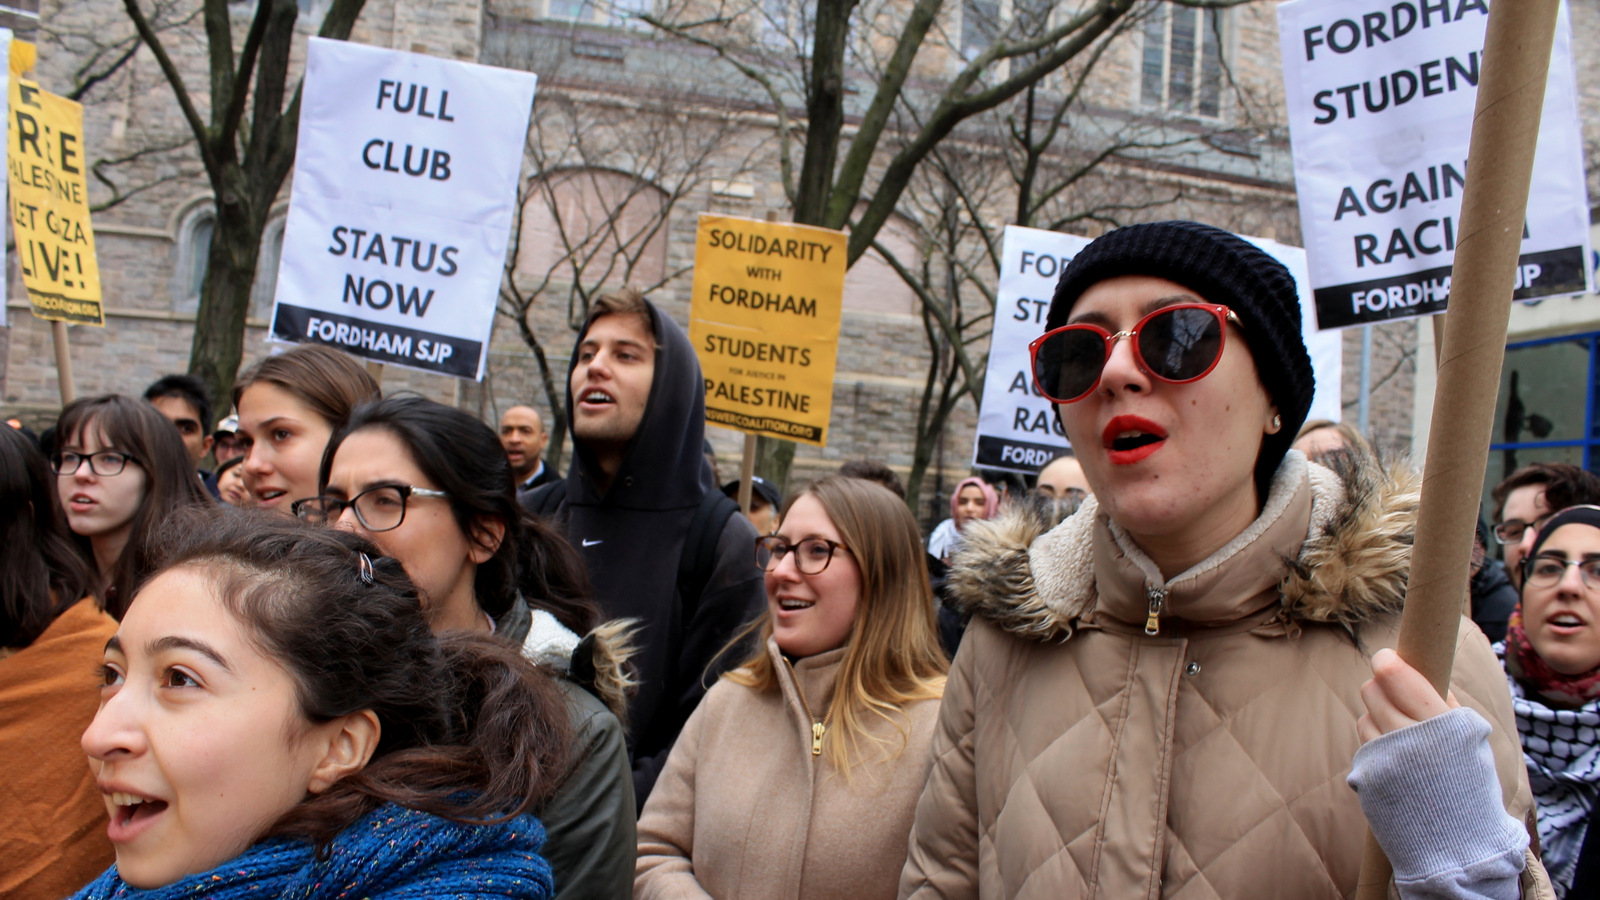 Recent demonstration of students and supporters protesting Fordham's ban of SJP.